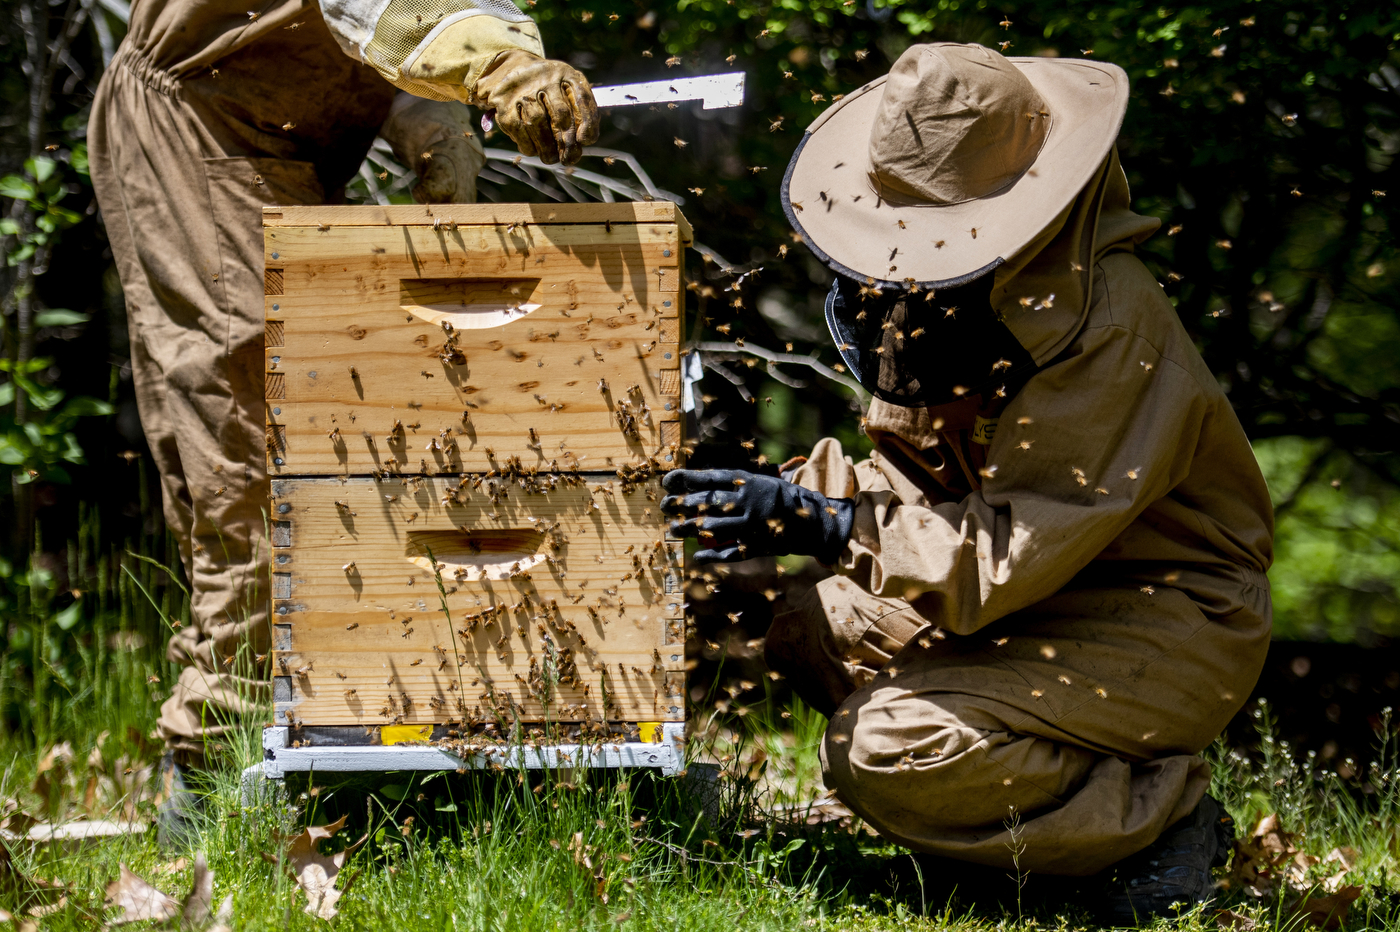 A beekeeper surrounded by bees next to a beehive